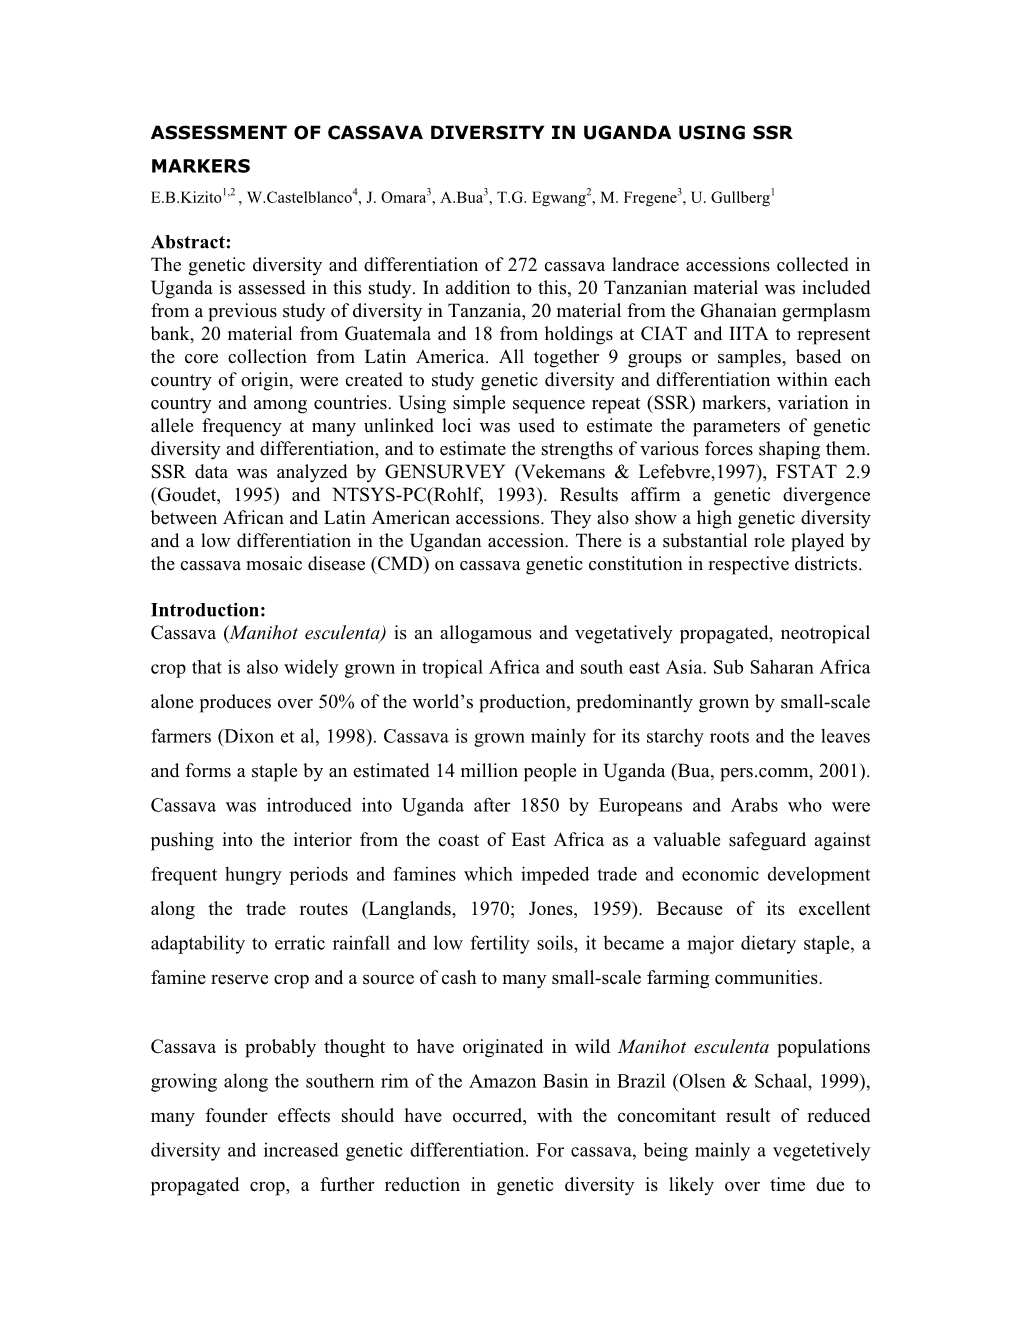 Abstract: the Genetic Diversity and Differentiation of 272 Cassava Landrace Accessions Collected in Uganda Is Assessed in This Study